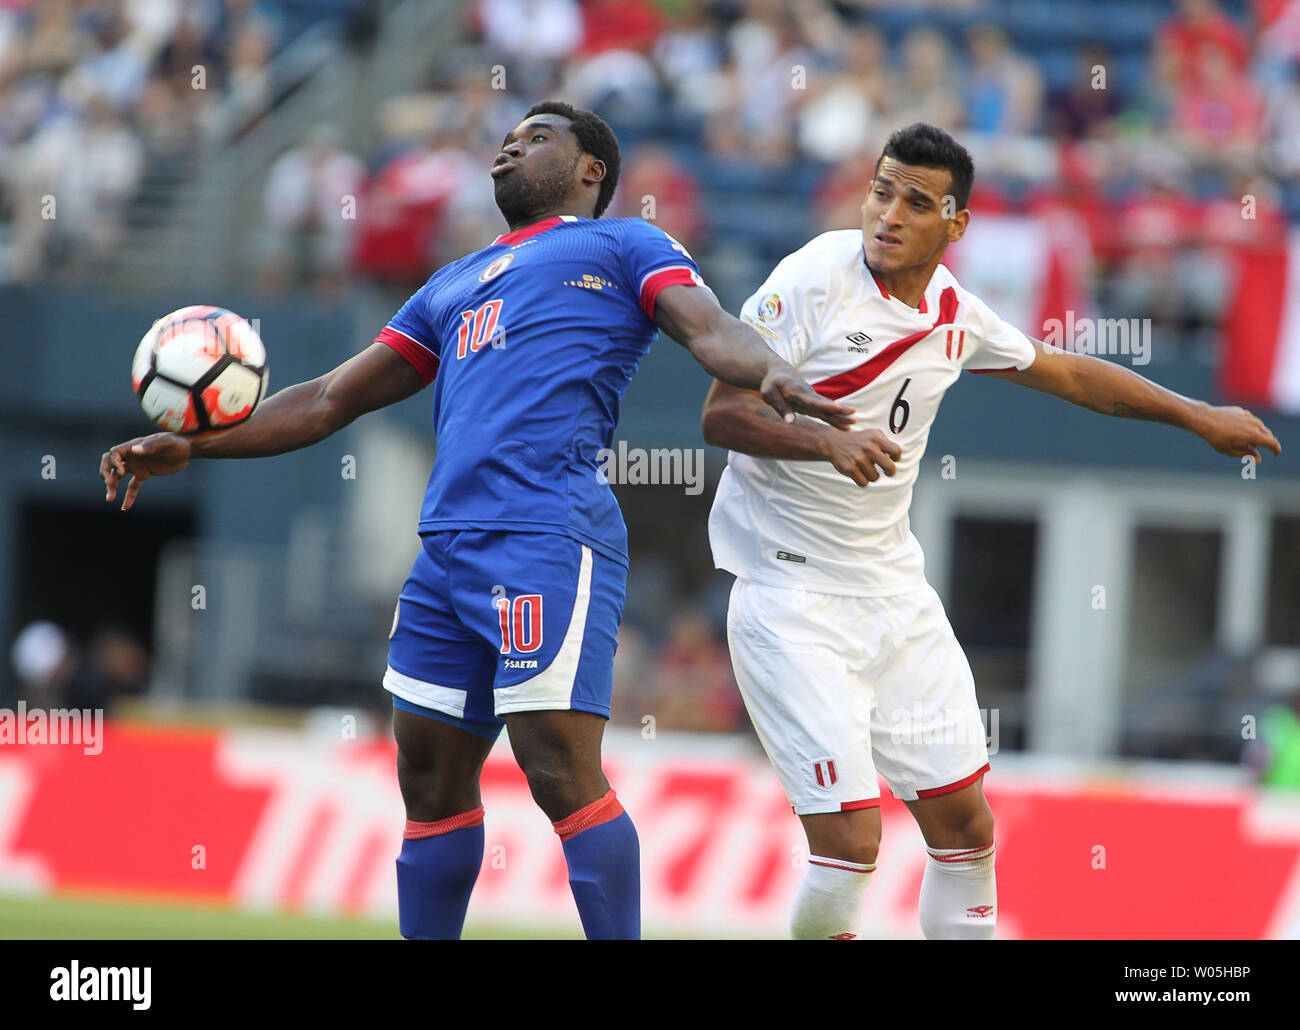 Haiti's Jeff Louis (10) keeps the ball away from Peru's Miguel Trauco (6) in a 2016 Copa America Centenario soccer match at CenturyLink Field in Seattle, Washington on June 4, 2016.  Peru beat Haiti - 1-0. Photo by Jim Bryant/ UPI Stock Photo